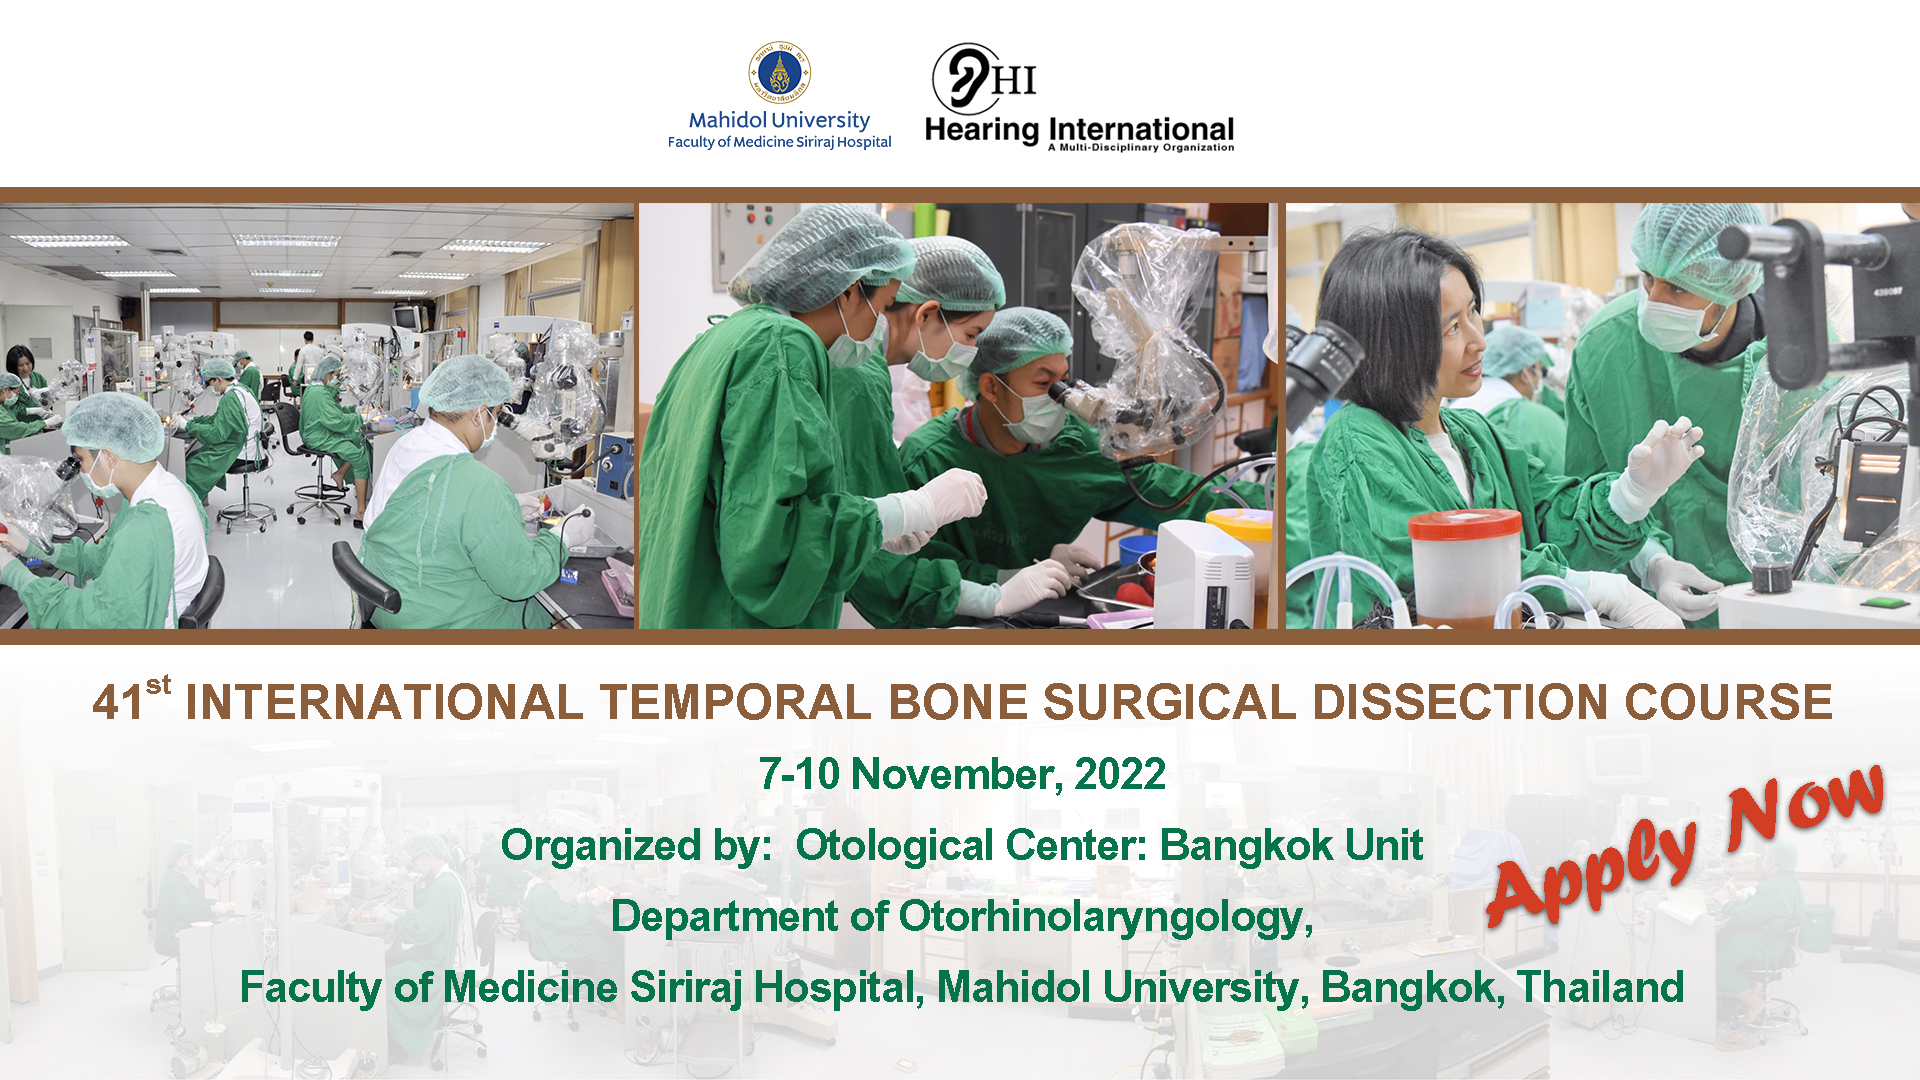 The 41st International Temporal Bone Surgical Dissection Course!